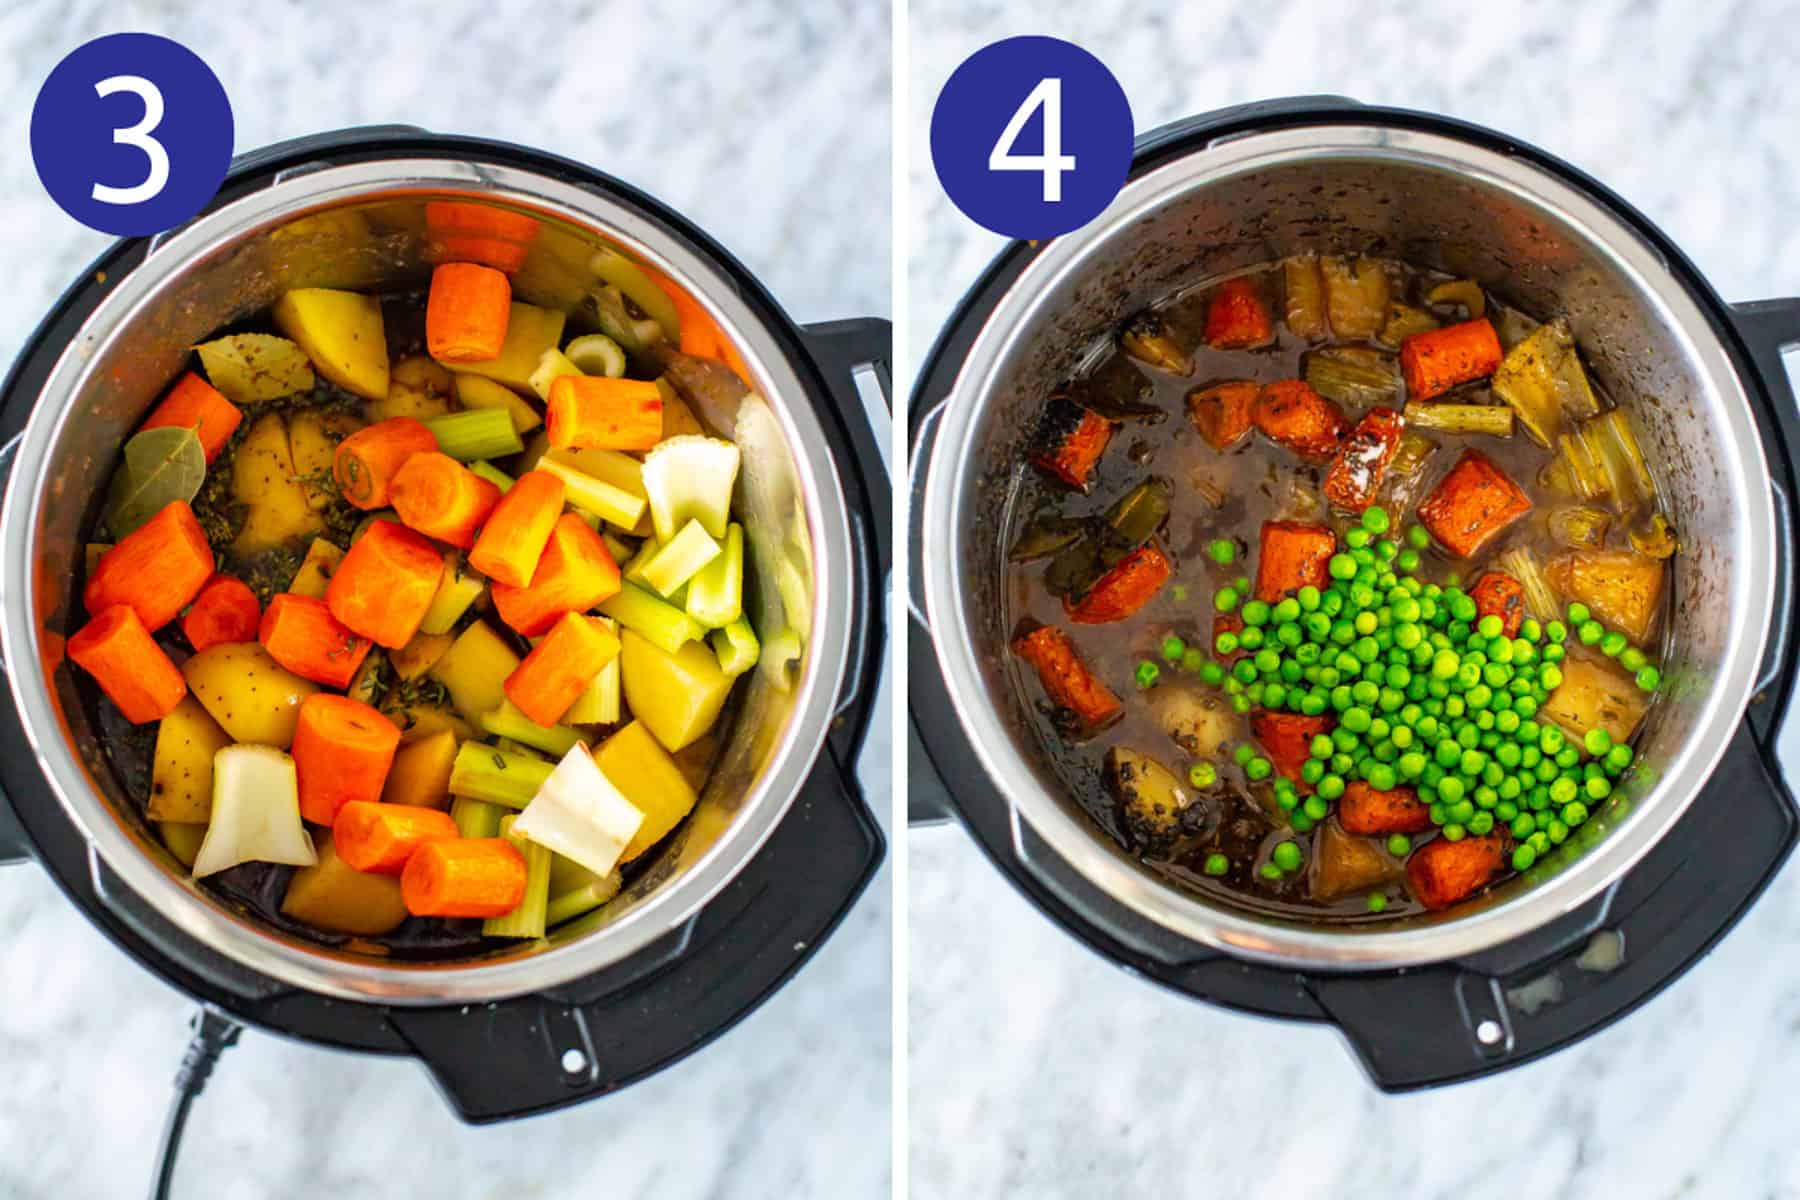 Steps 3 and 4 for making Instant Pot beef stew: Add all other ingredients (except peas, water and constarch) and cook. Release pressure and add in peas.